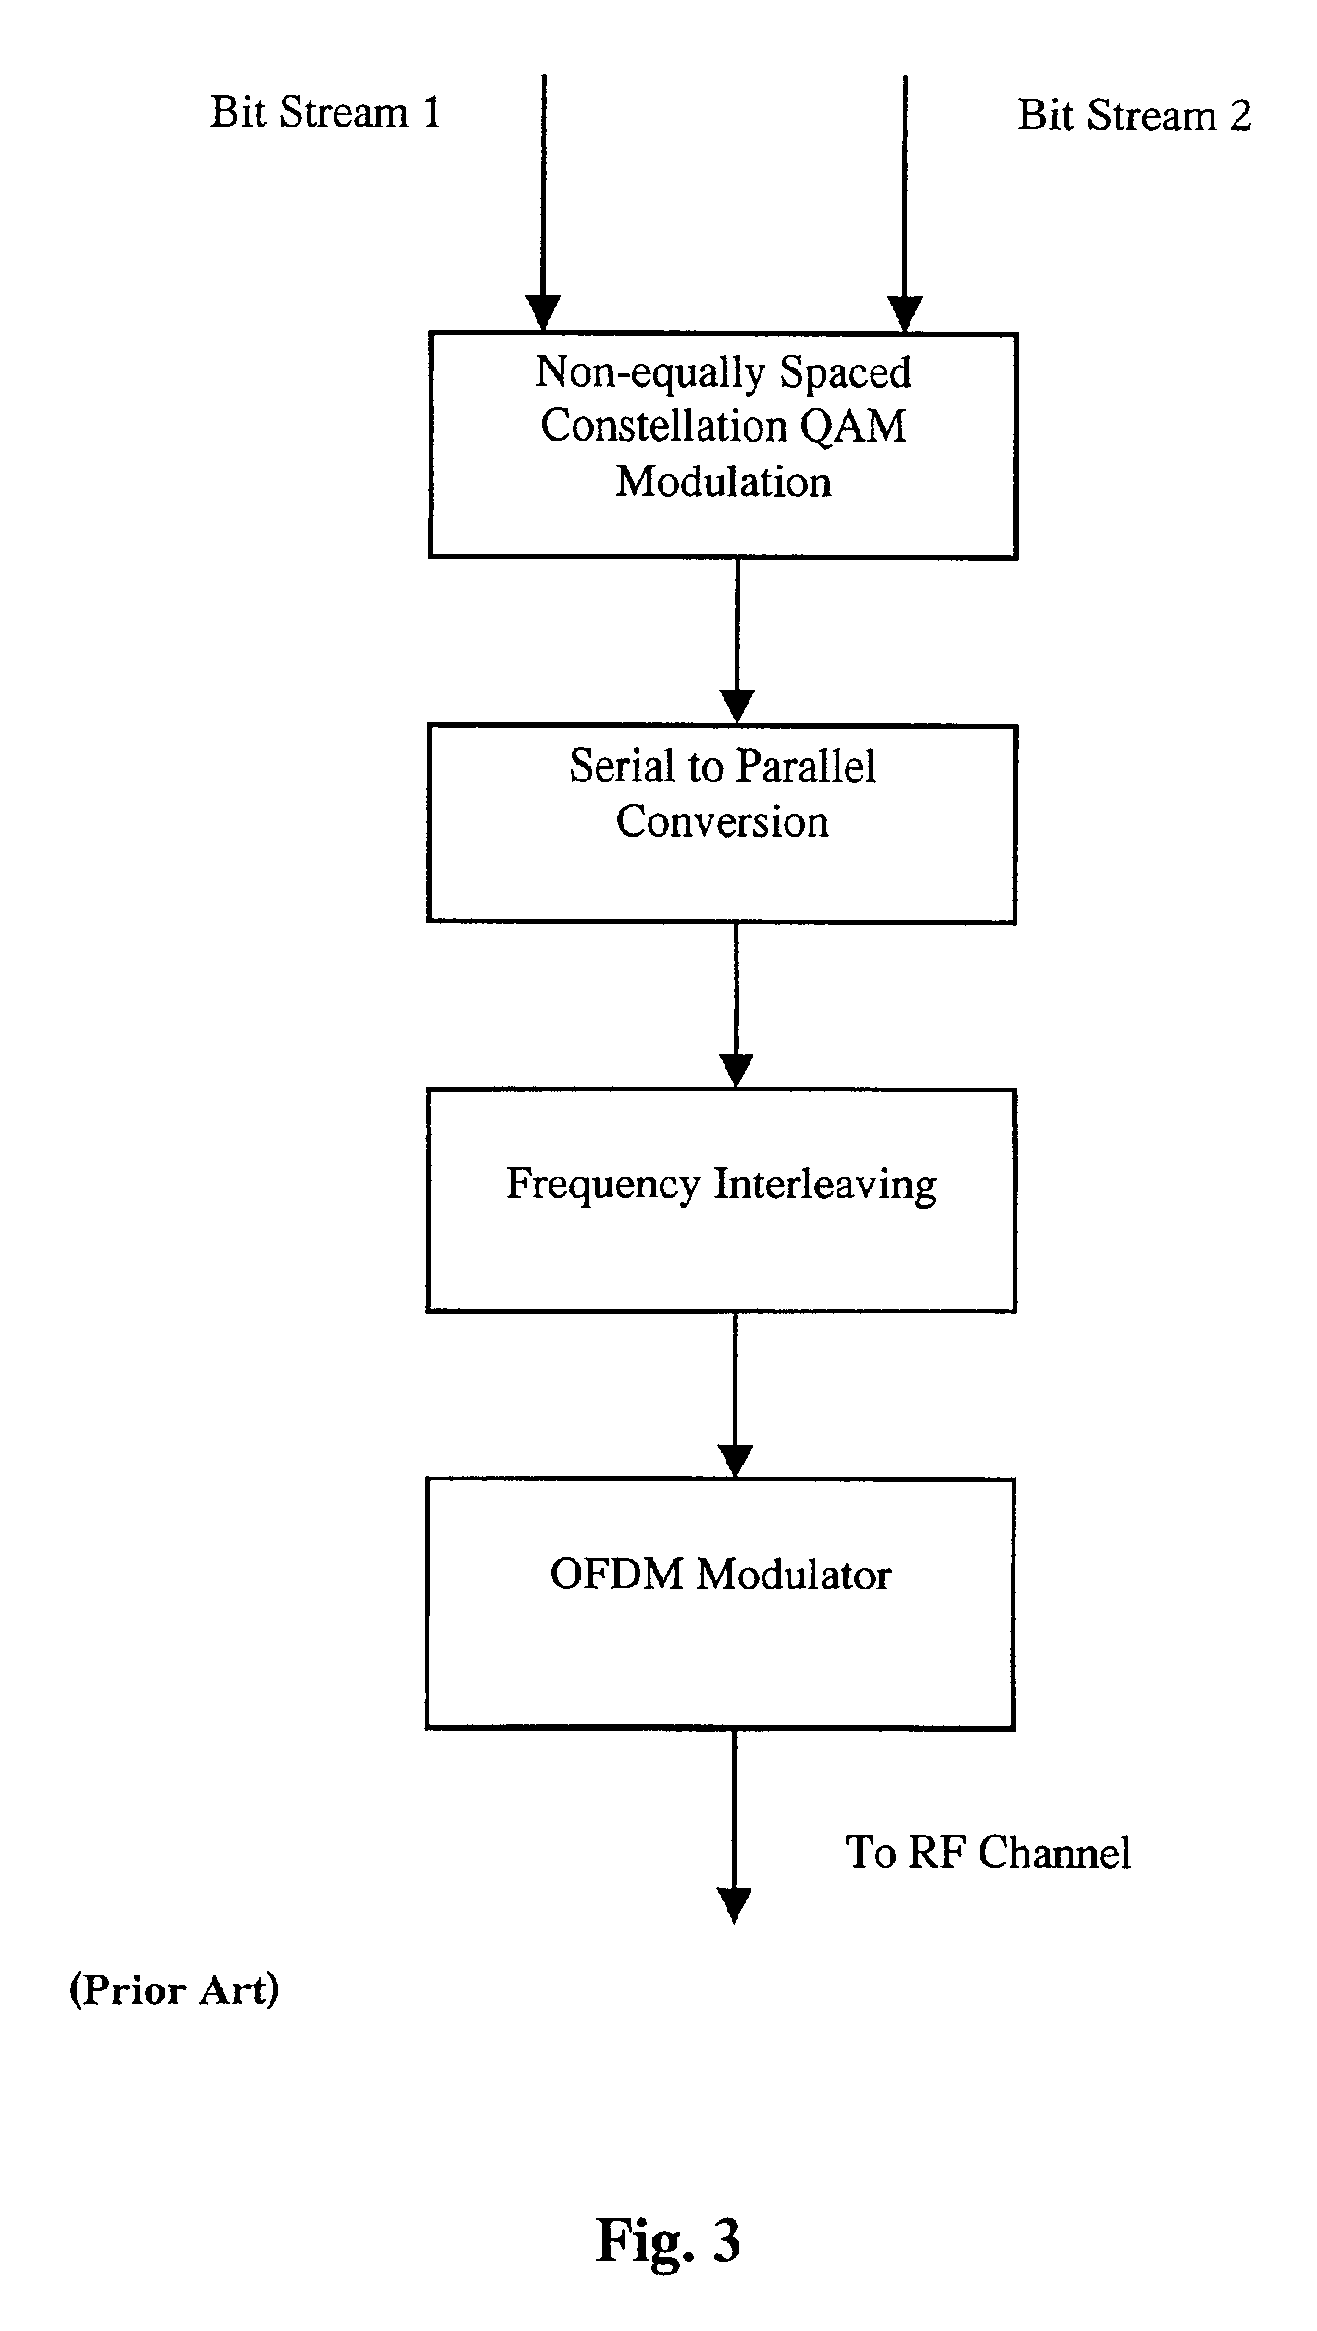 Method and system for tiered digital television terrestrial broadcasting services using multi-bit-stream frequency interleaved OFDM